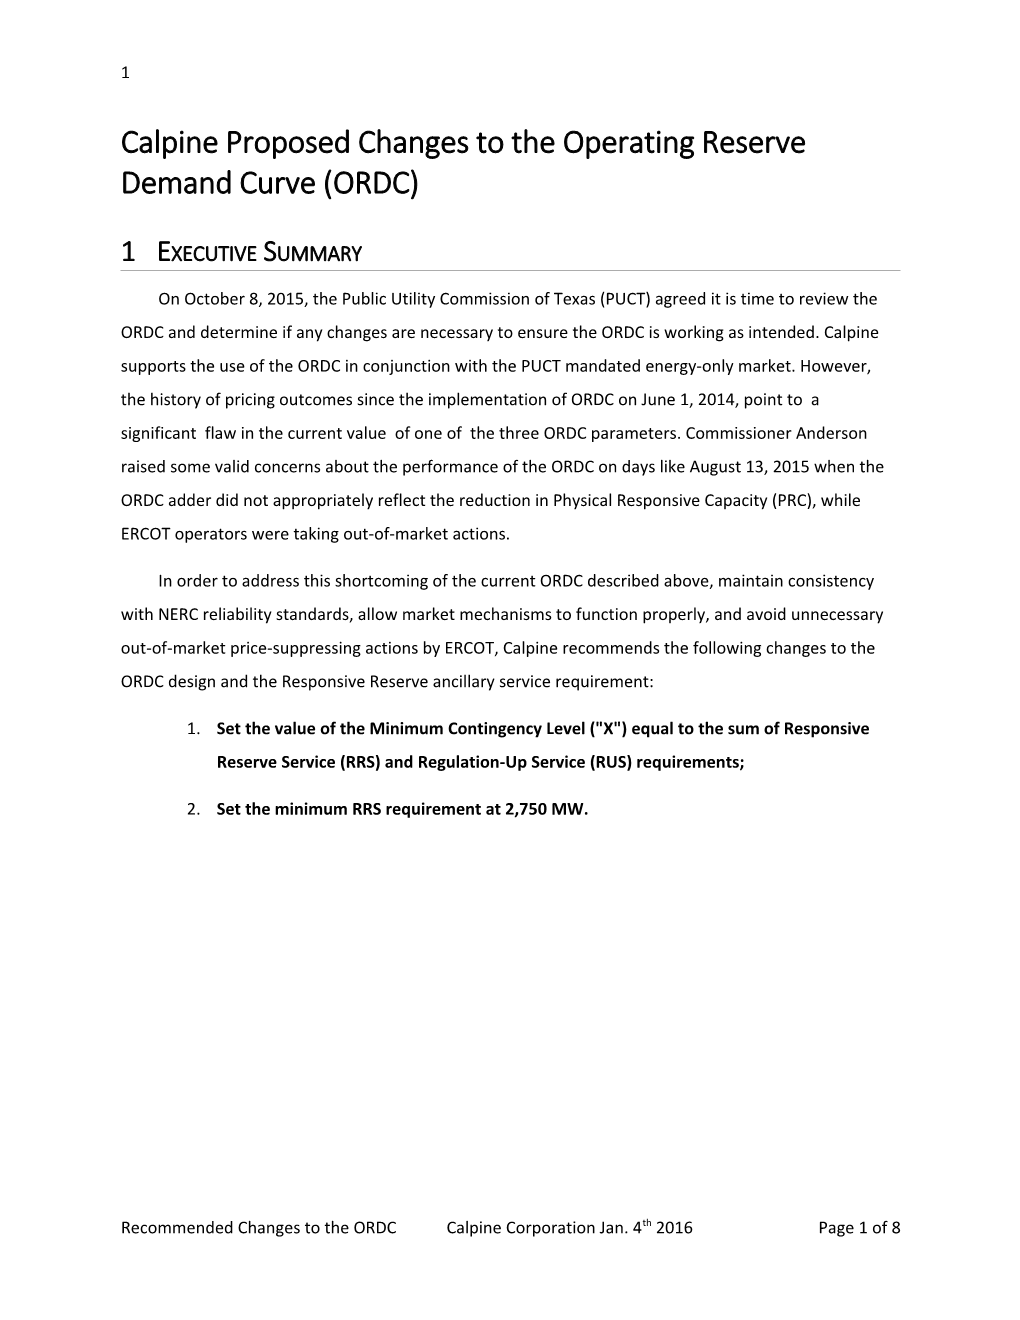 Calpine Proposed Changes to the Operating Reserve Demand Curve (ORDC)